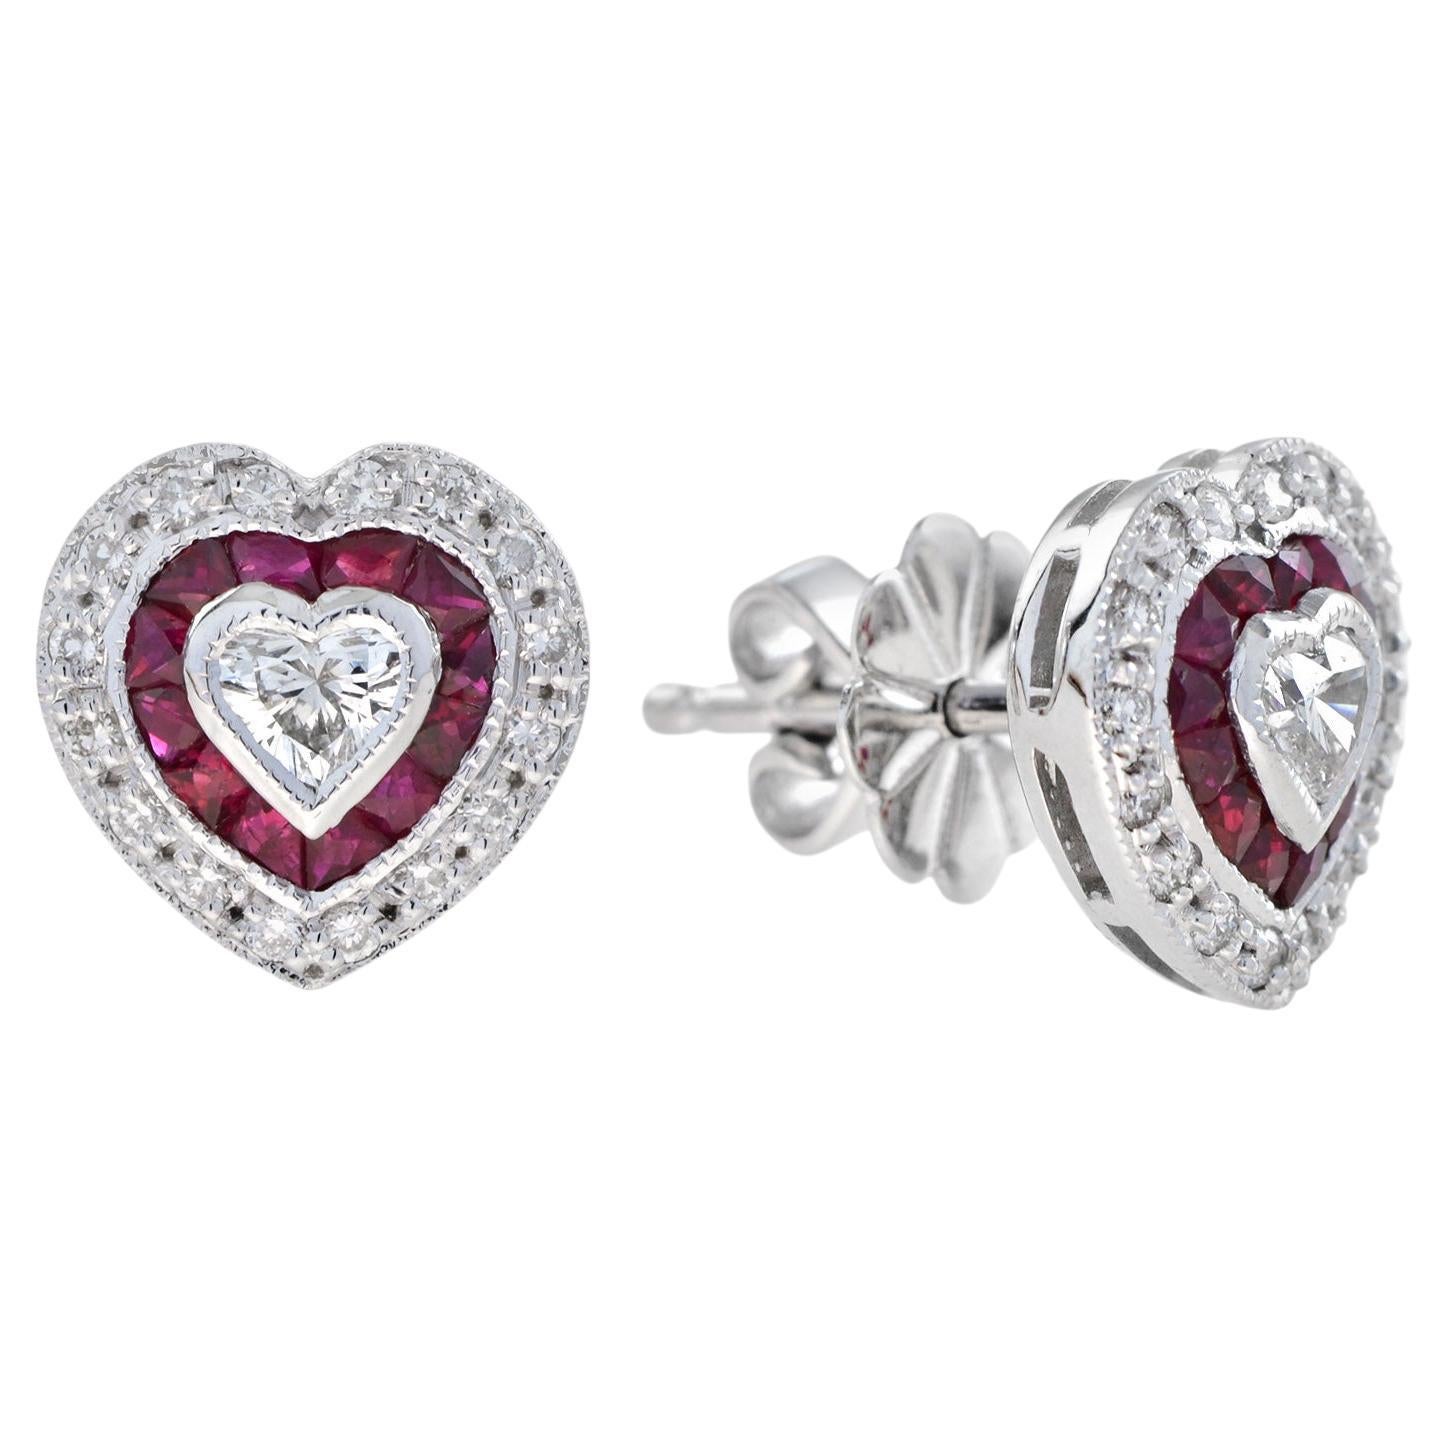 Heart Shaped Diamond and Ruby Art Deco Style Stud Earrings in 14K White Gold